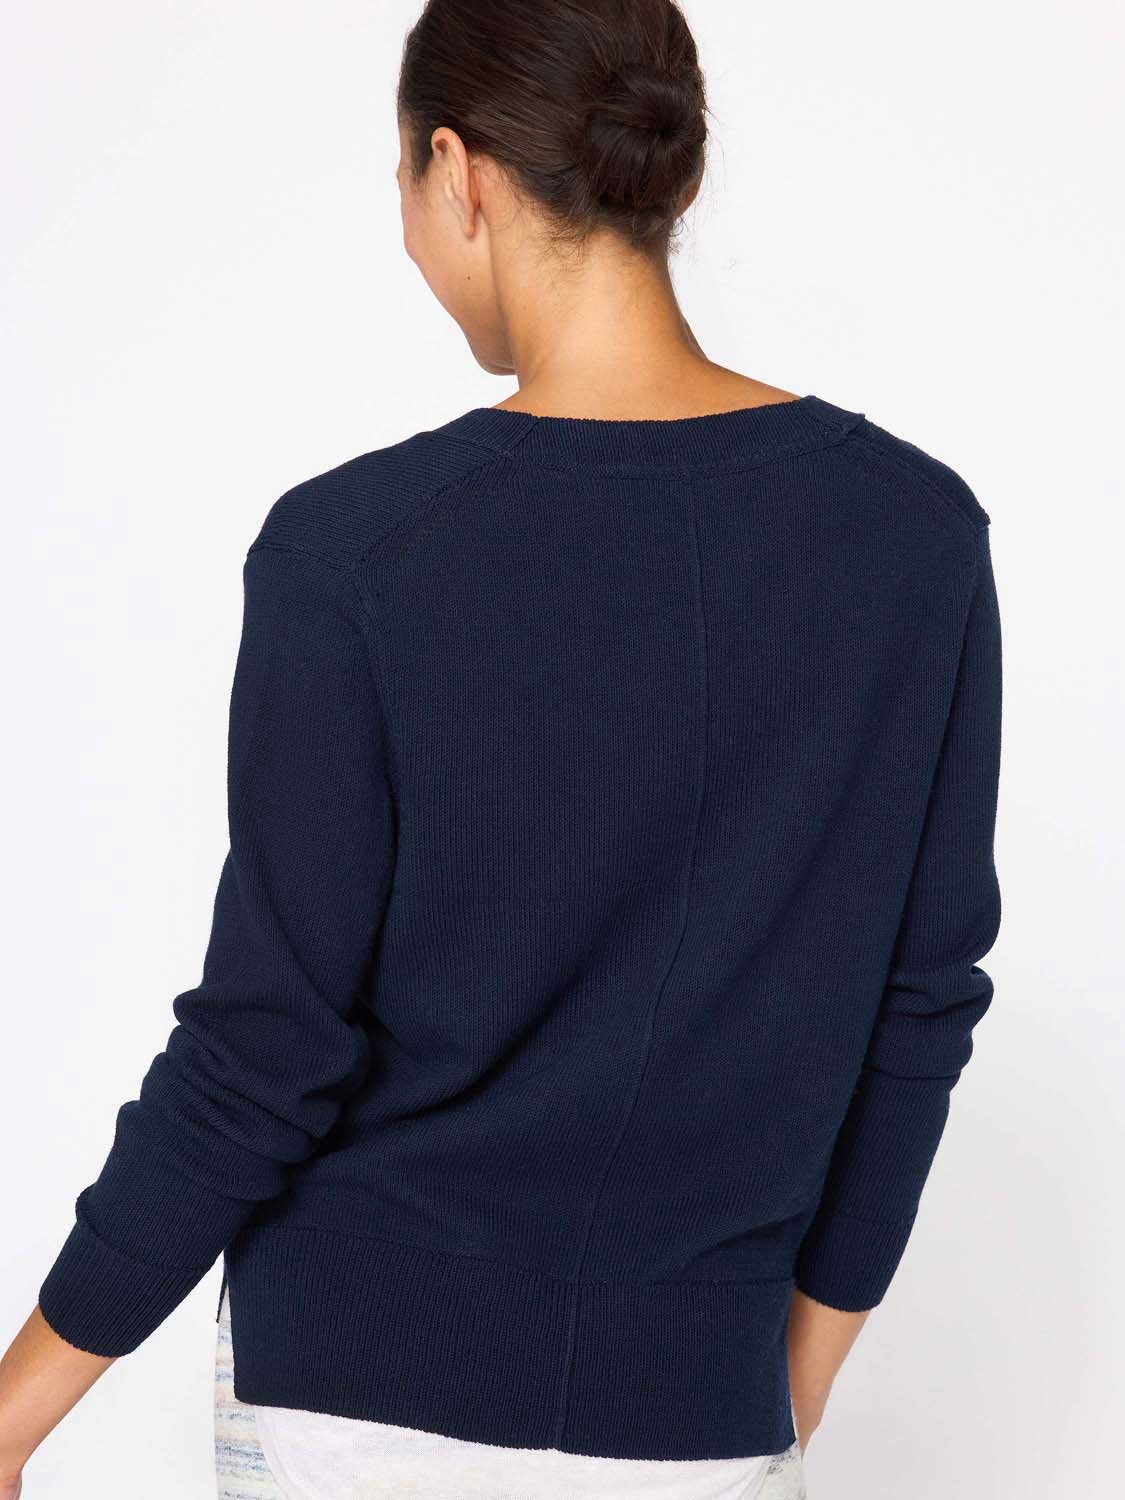 Roan navy layered henley sweater back view